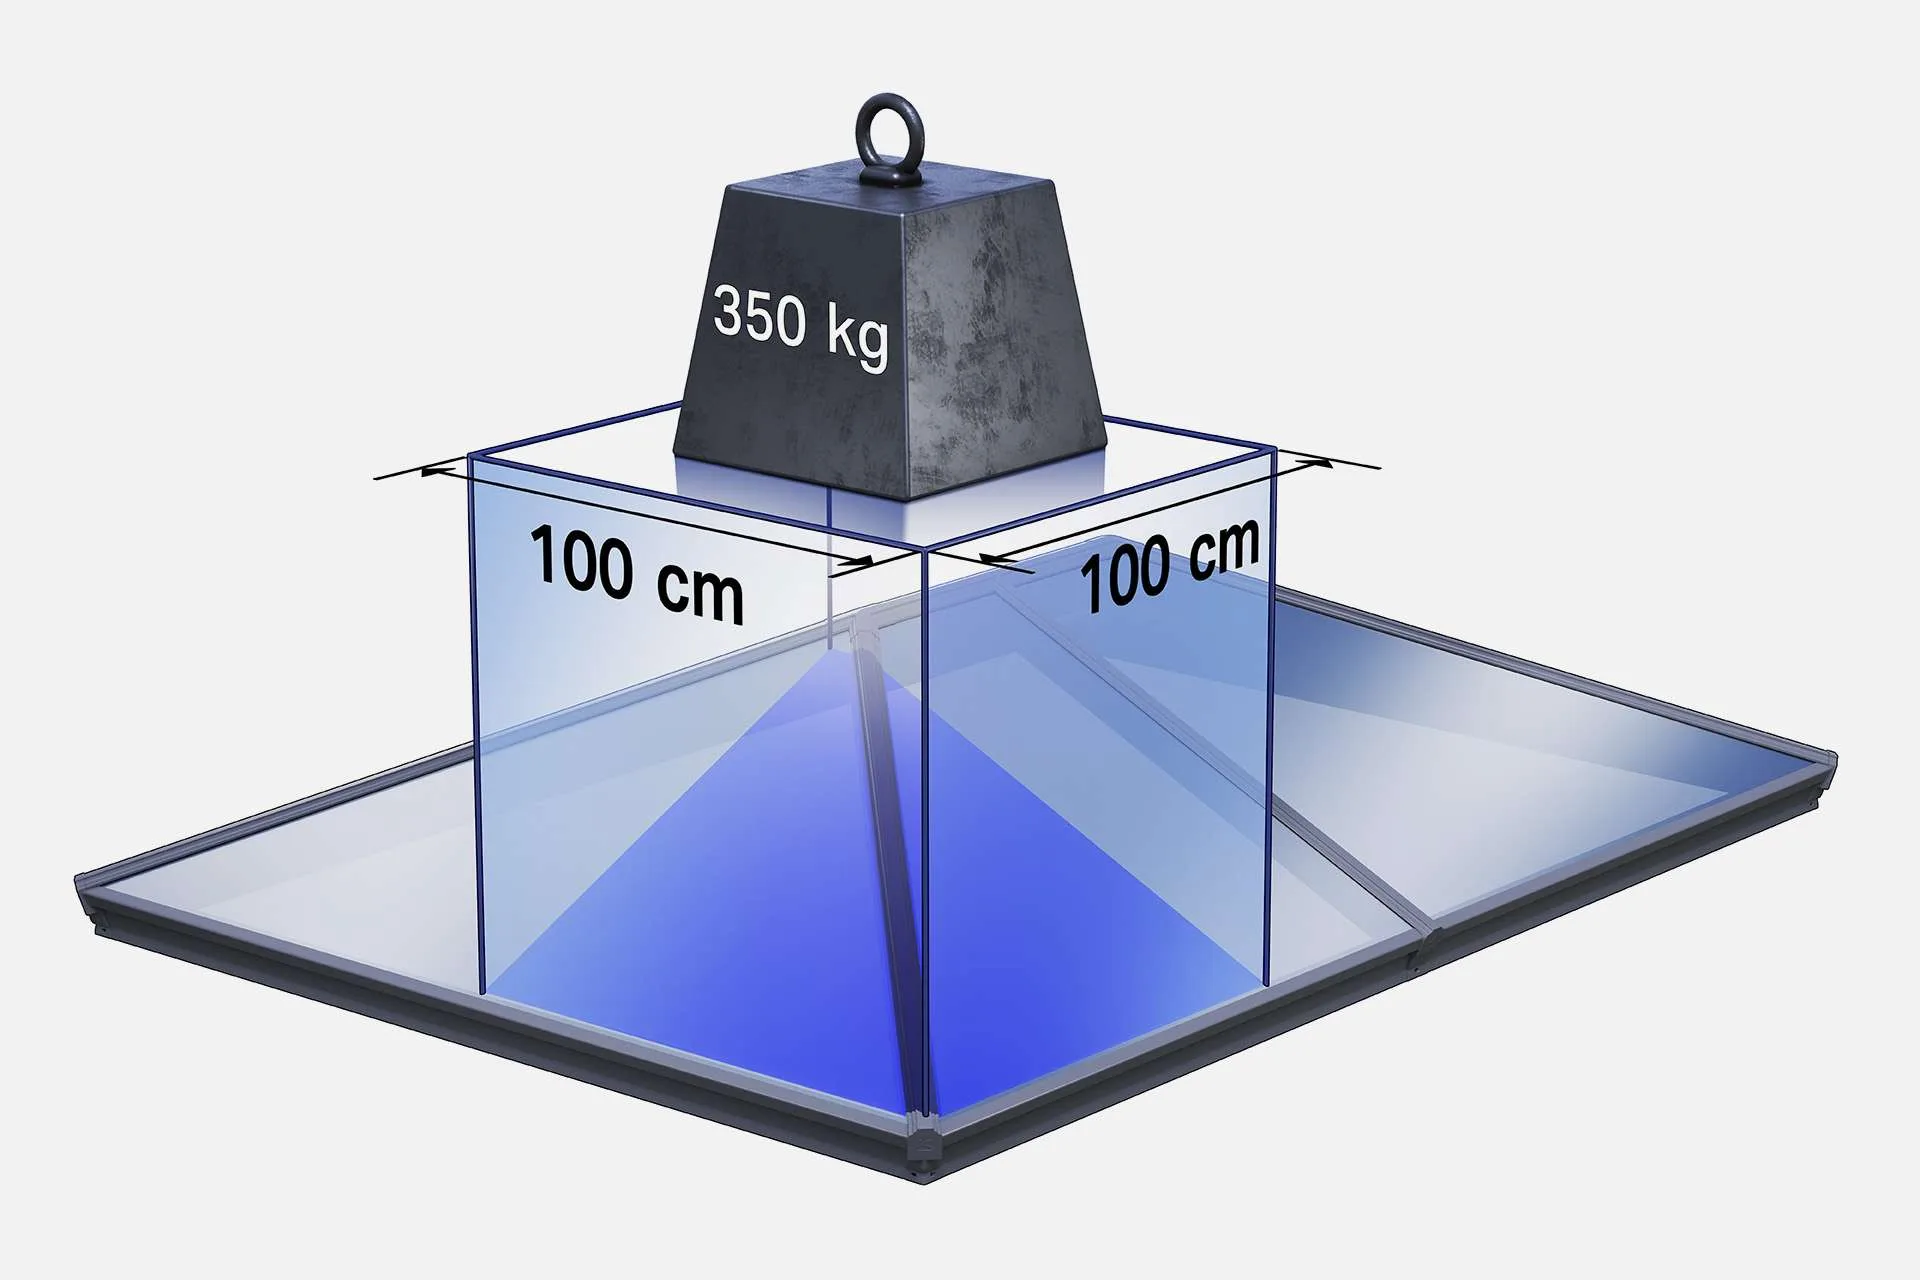 Digital illustration showcasing the strength of a Korniche Roof Lantern. A weight of 350kg is placed on a 100cm x 100cm area, demonstrating its ability to support industry-leading maximum glass sizes without additional rafters.